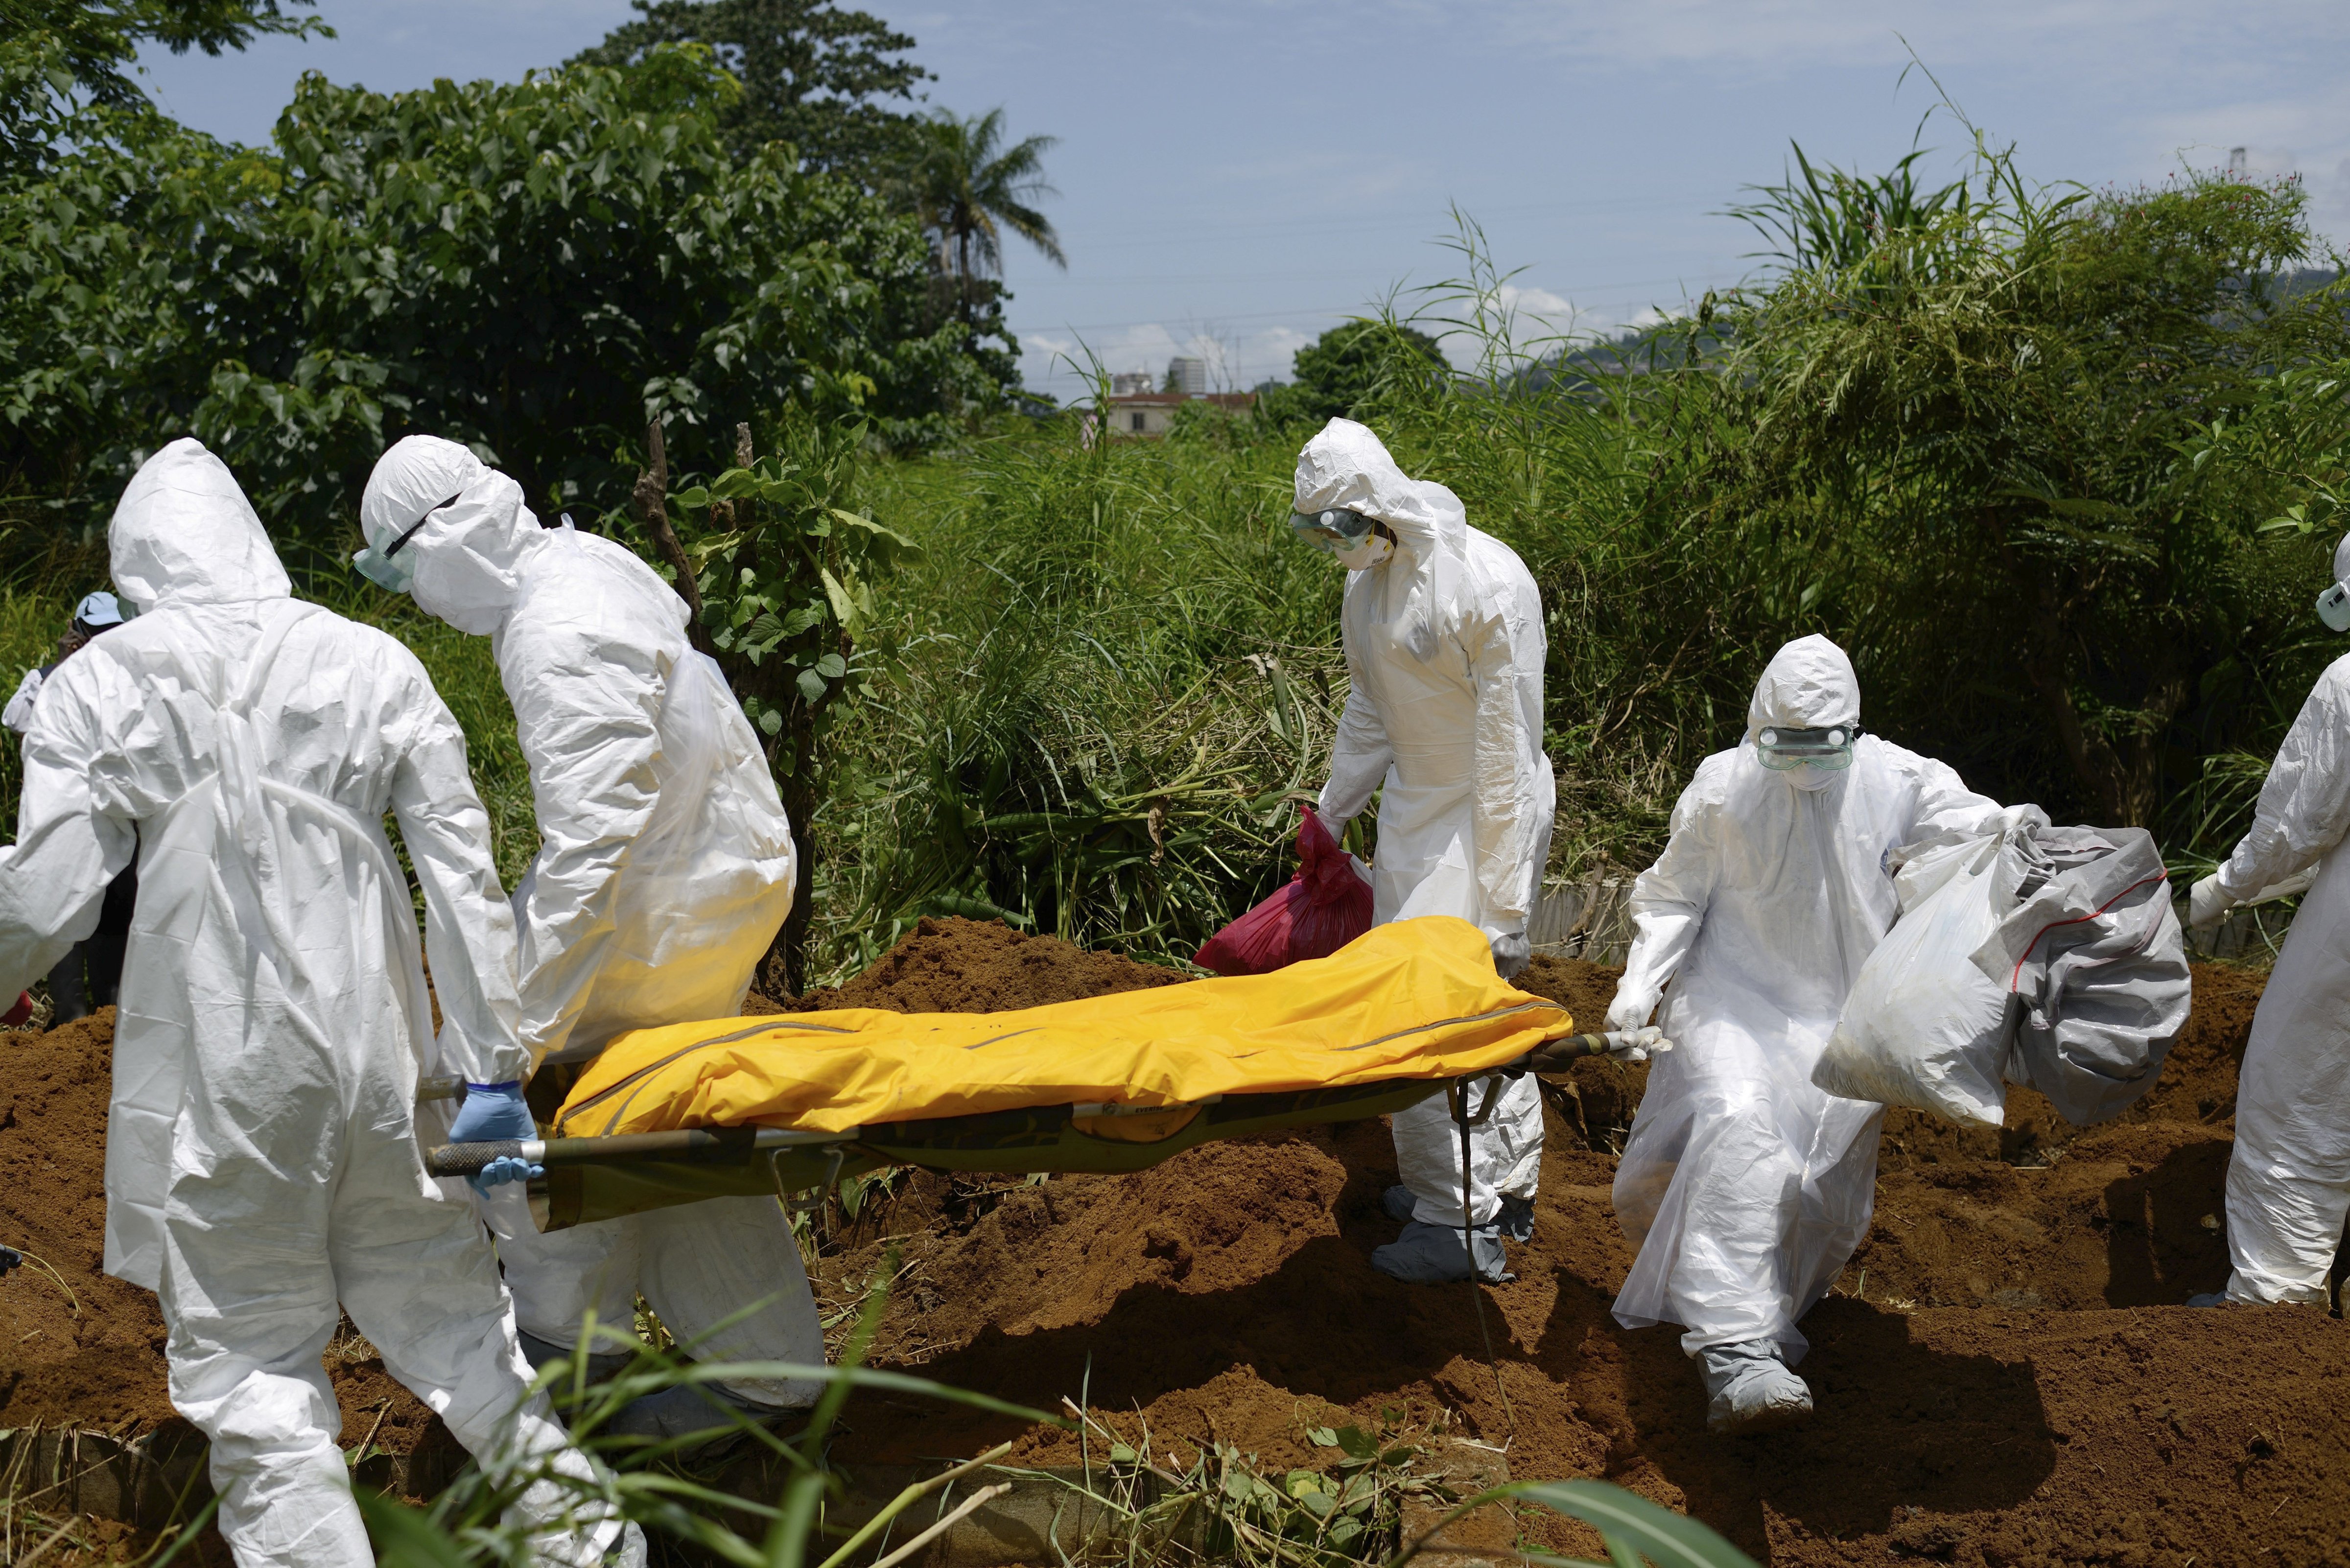 Members of a burial team wearing protective suits bury an Ebola victim at King Tom Cemetery, which is bitterly resented by residents of the adjoining slum, called Kolleh Town, in Freetown, Sierra Leone, Sept. 21, 2014. (Samuel Aranda—The New York Times/Redux)